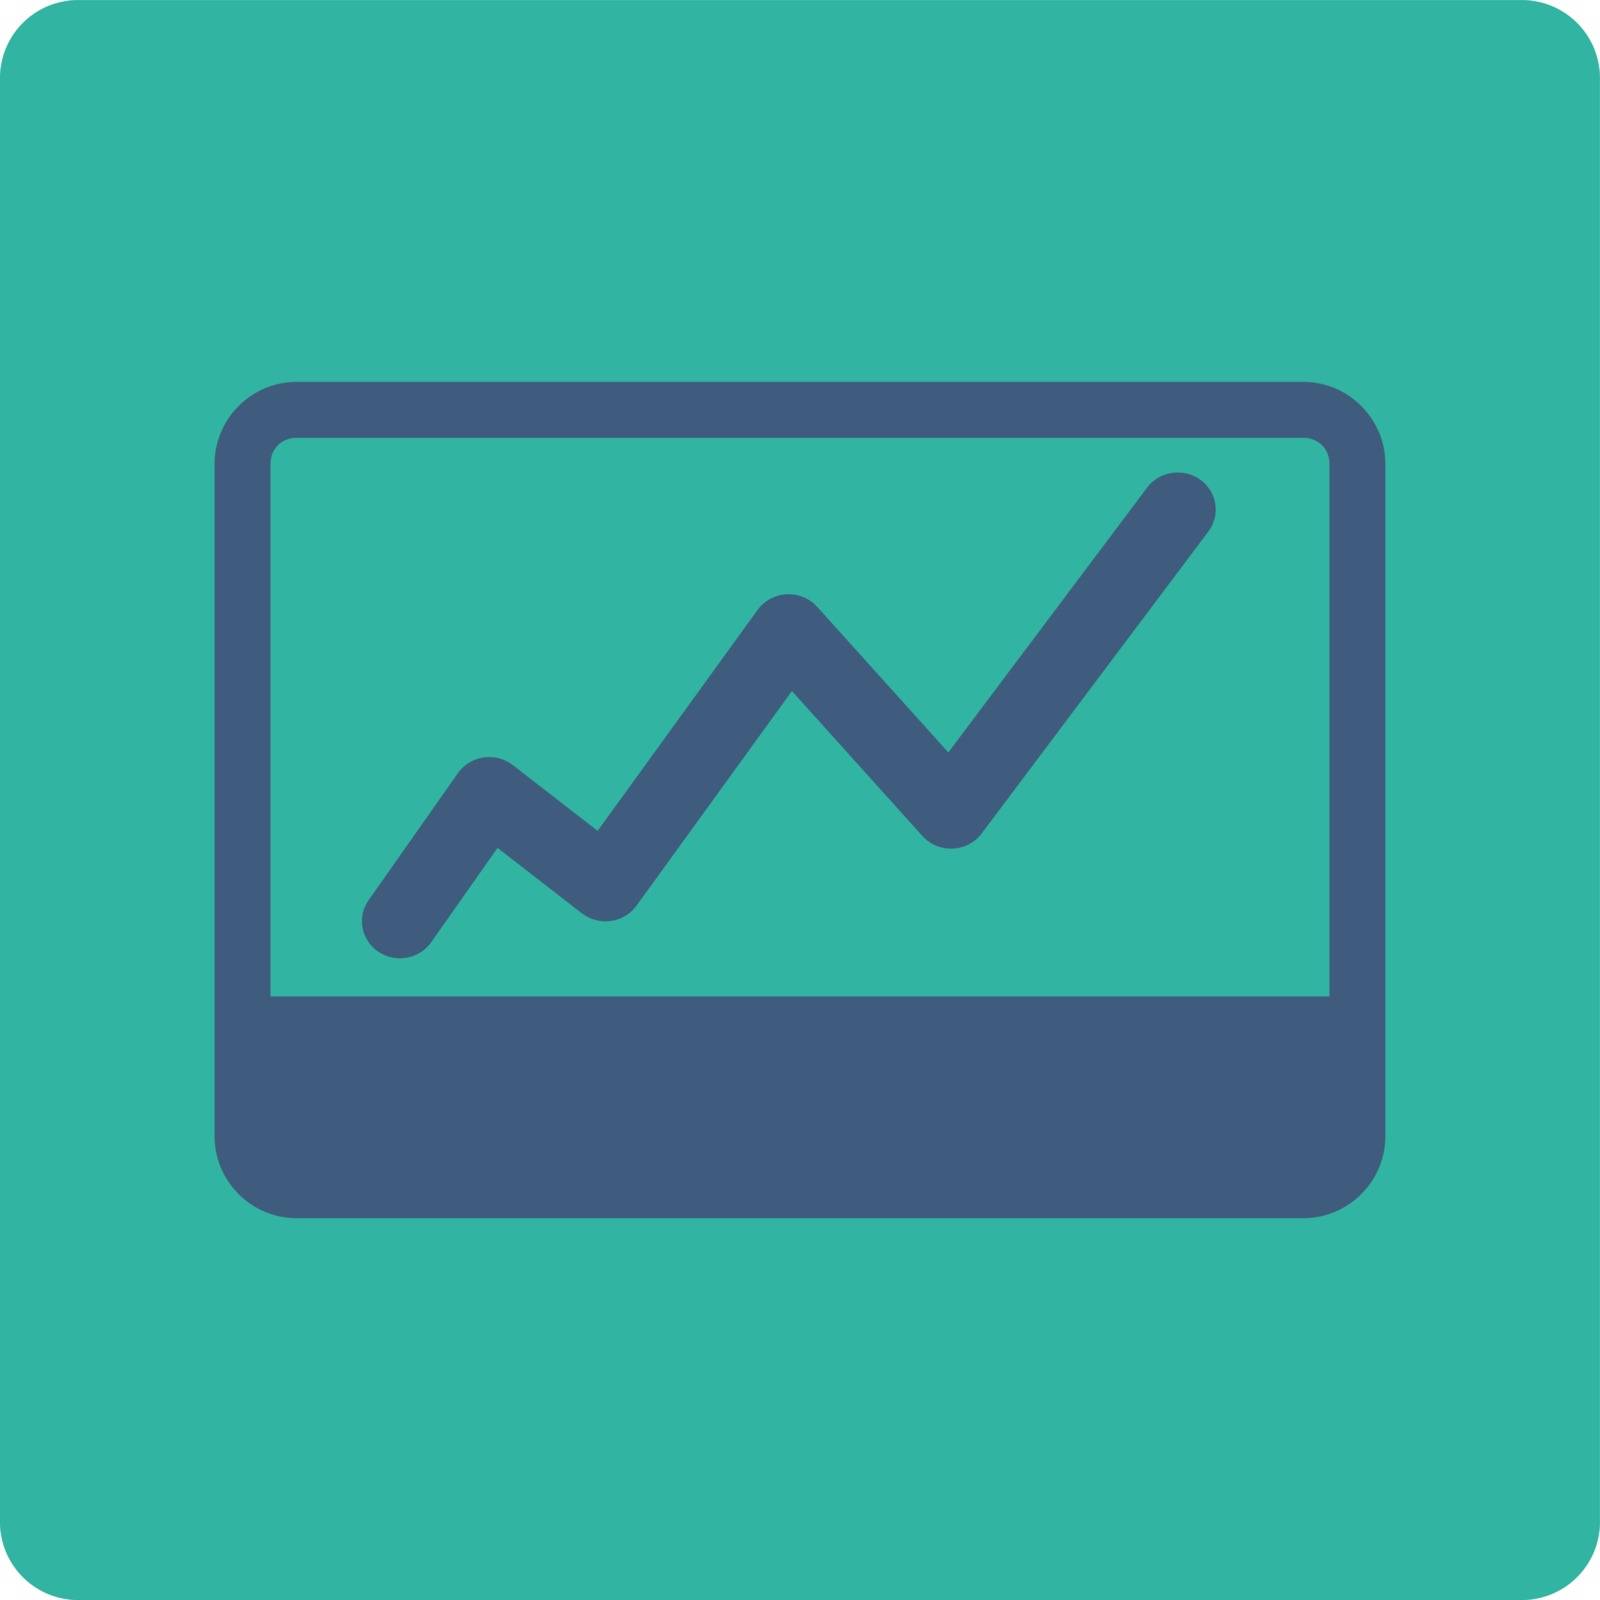 Stock Market icon. This flat rounded square button uses cobalt and cyan colors and isolated on a white background.